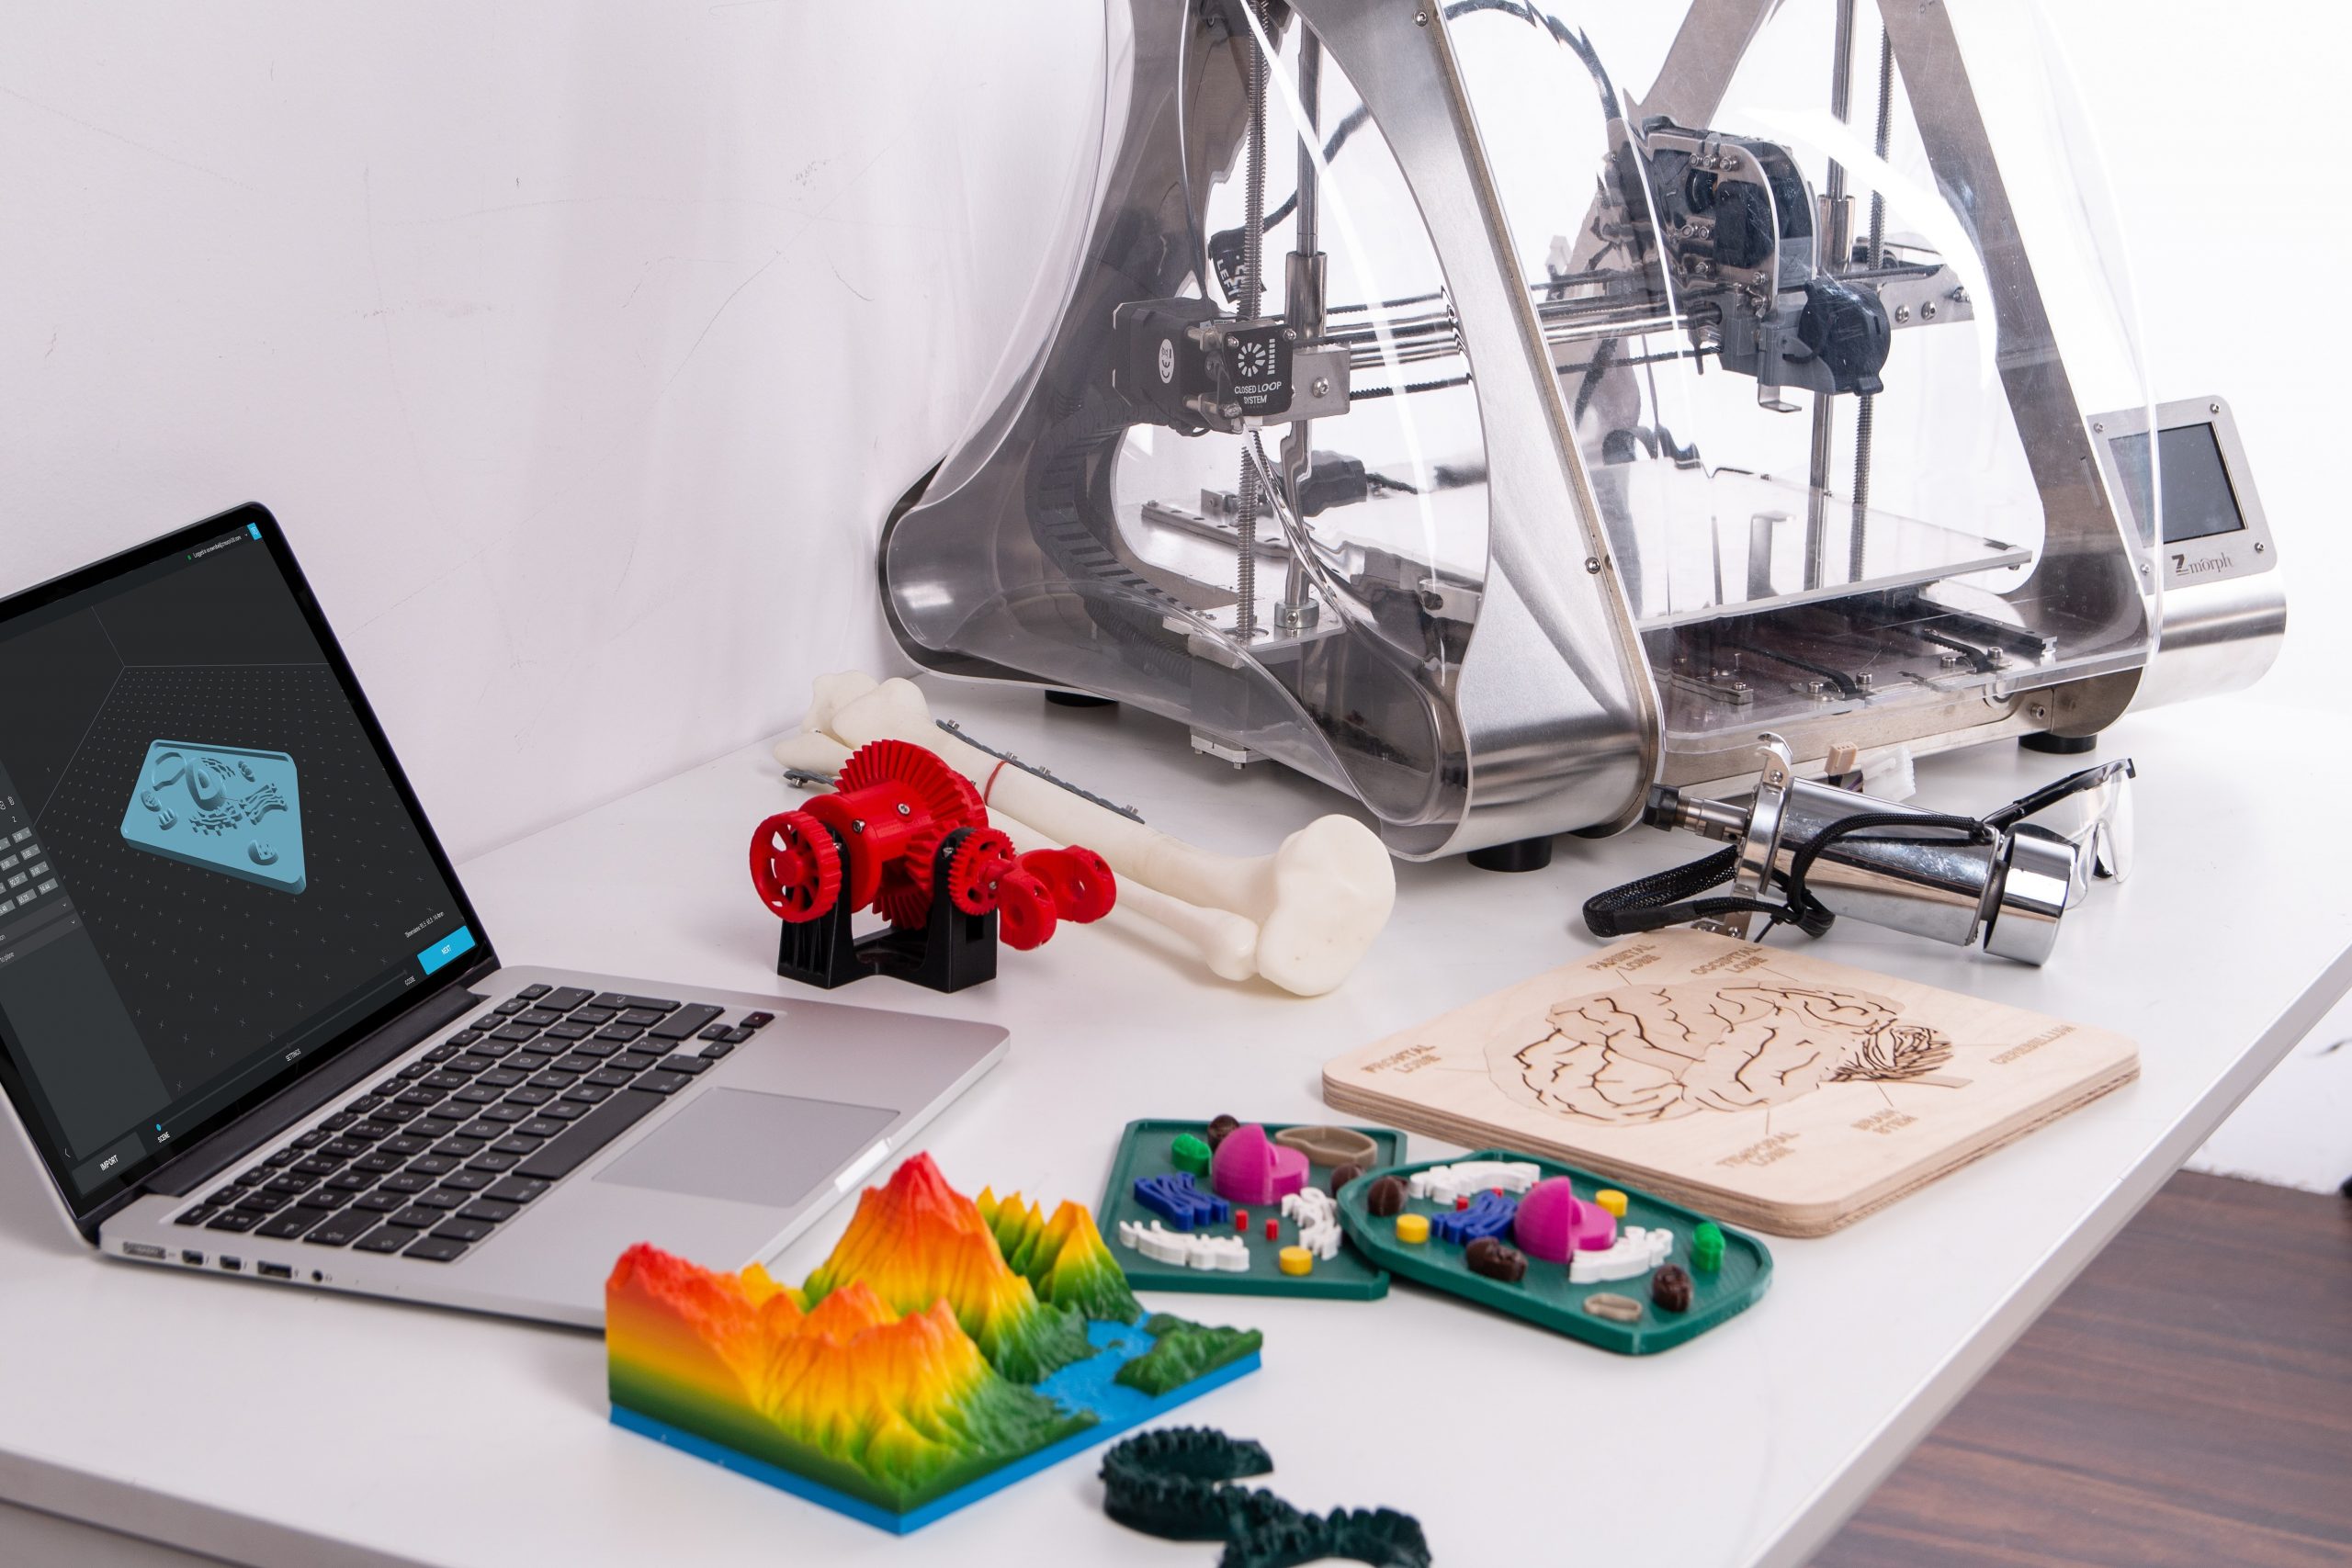 A 3-D printer sits beside a laptop and small colorful plastic pieces.